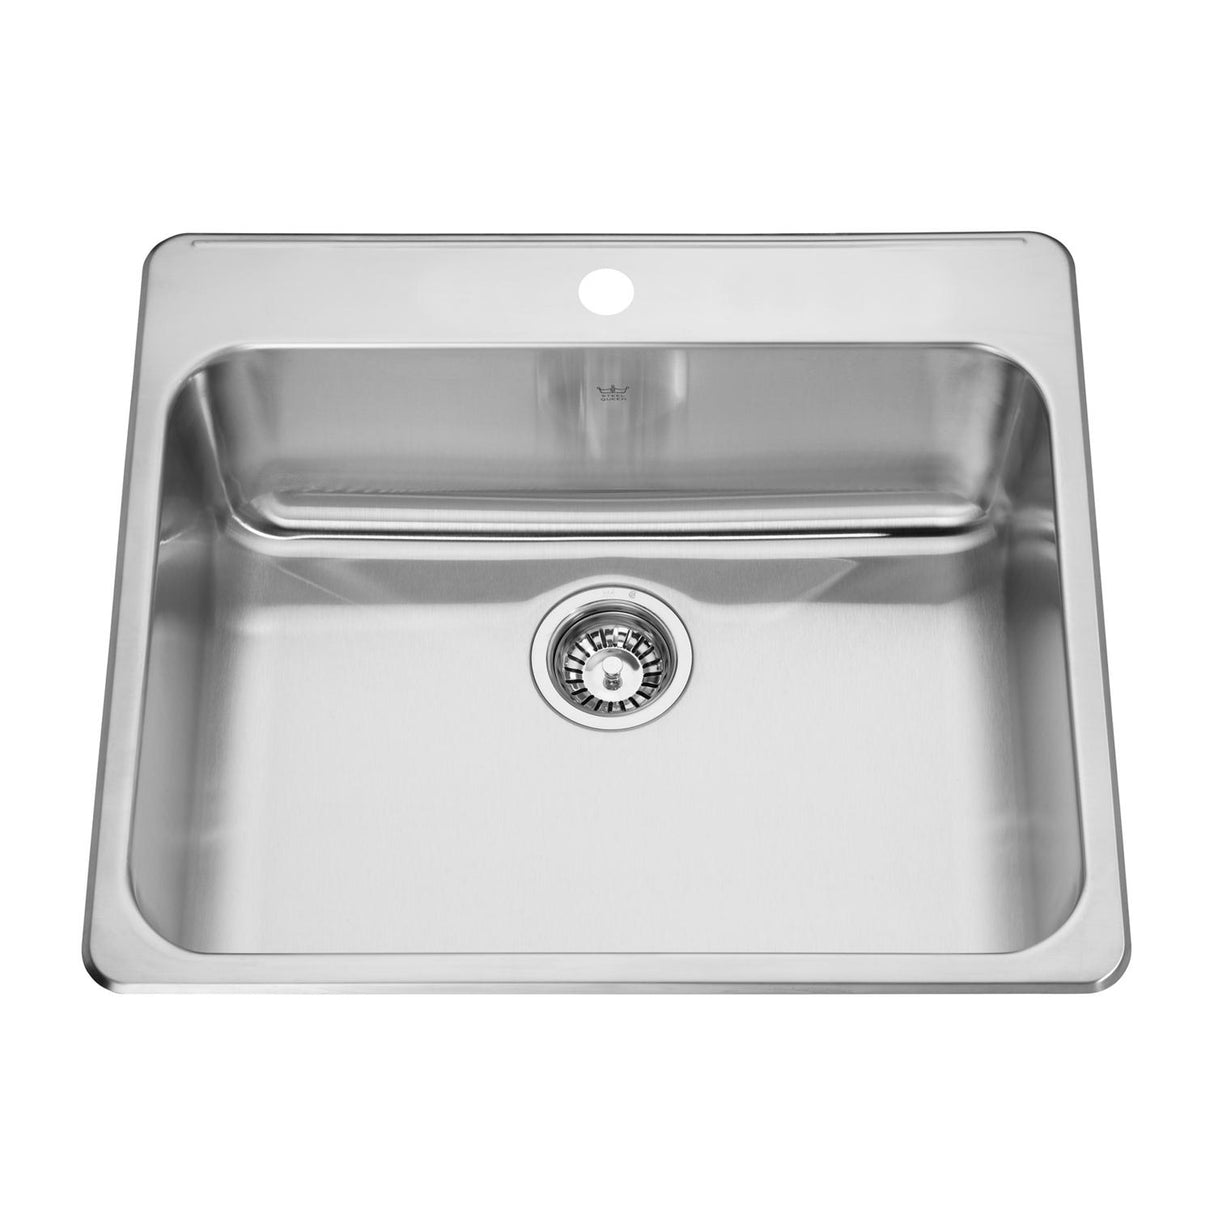 KINDRED QSLA2225-8-1N Steel Queen 25.25-in LR x 22-in FB x 8-in DP Drop In Single Bowl 1-Hole Stainless Steel Kitchen Sink In Satin Finished Bowl with Mirror Finished Rim